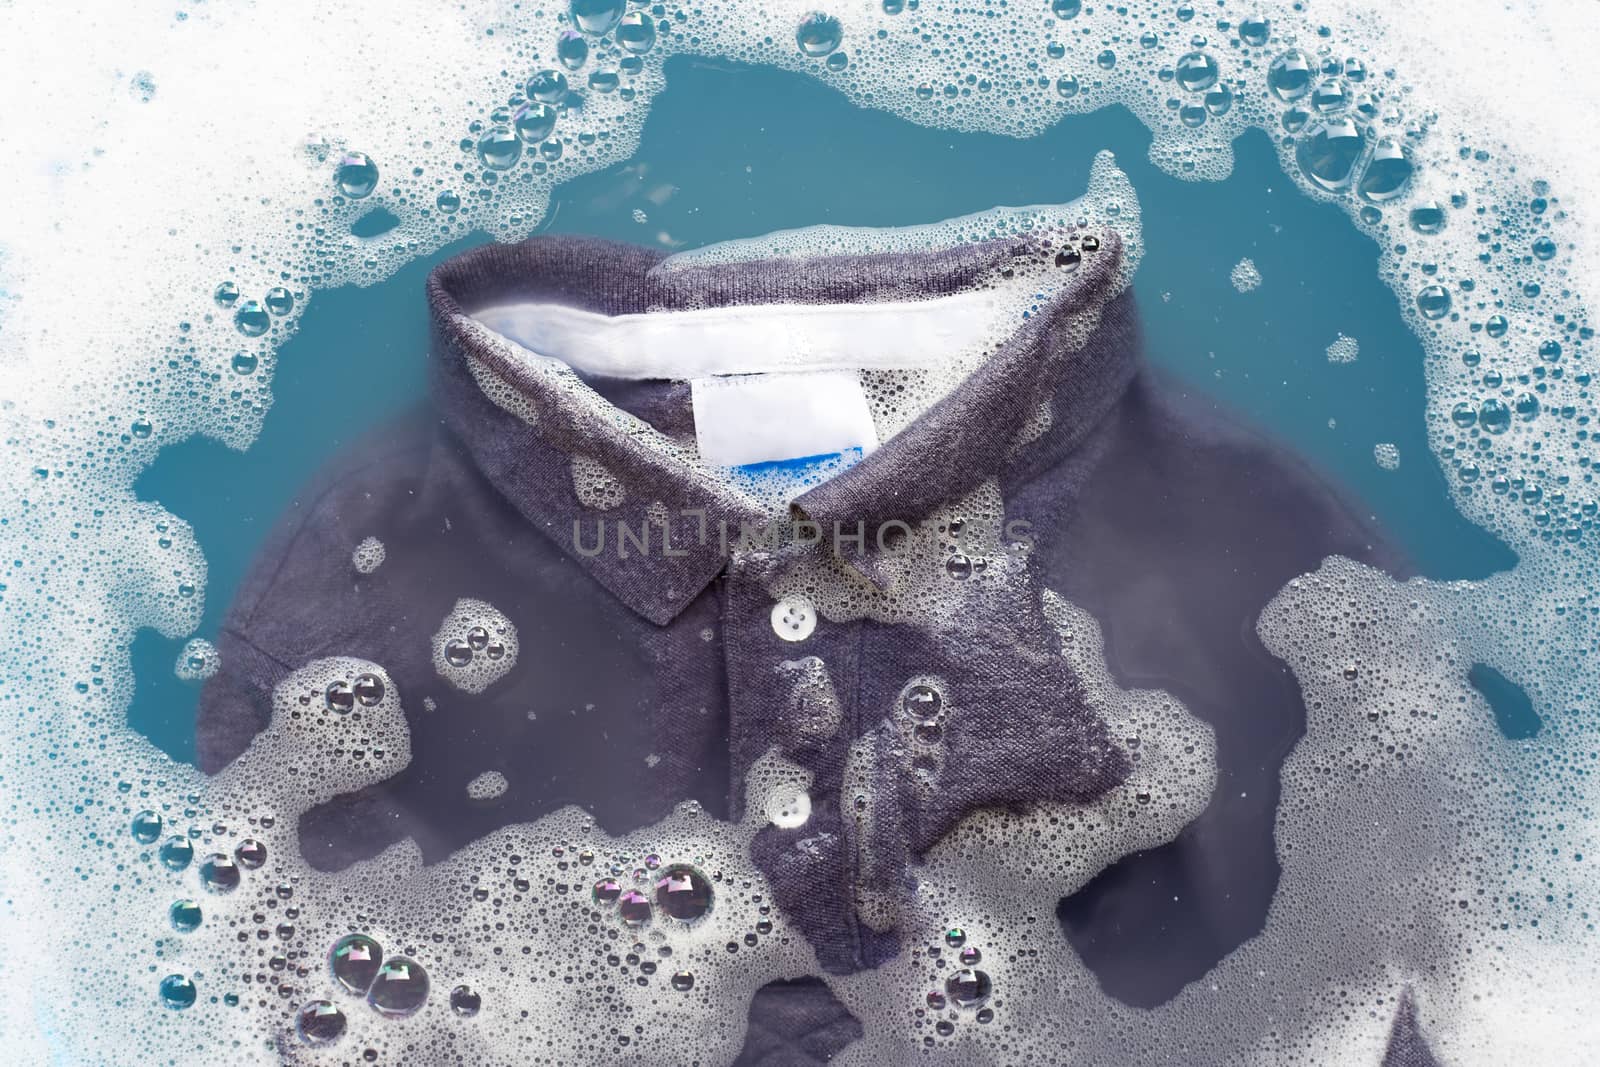 Grey polo shirt soak in powder detergent water dissolution, washing cloth. Laundry concept